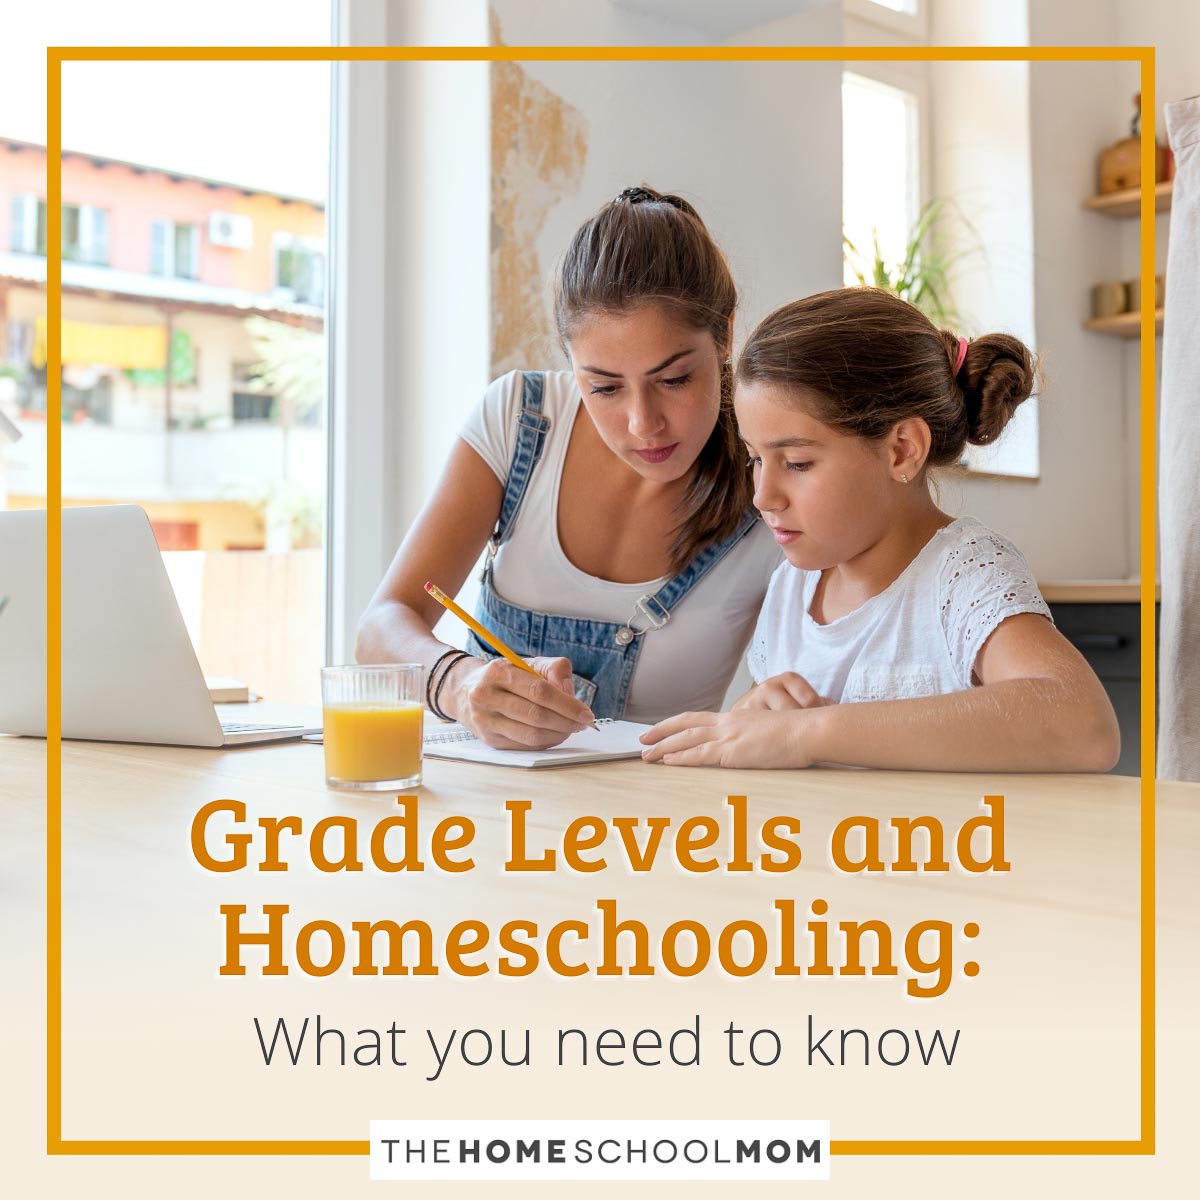 Grade Levels and Homeschooling: What you need to know